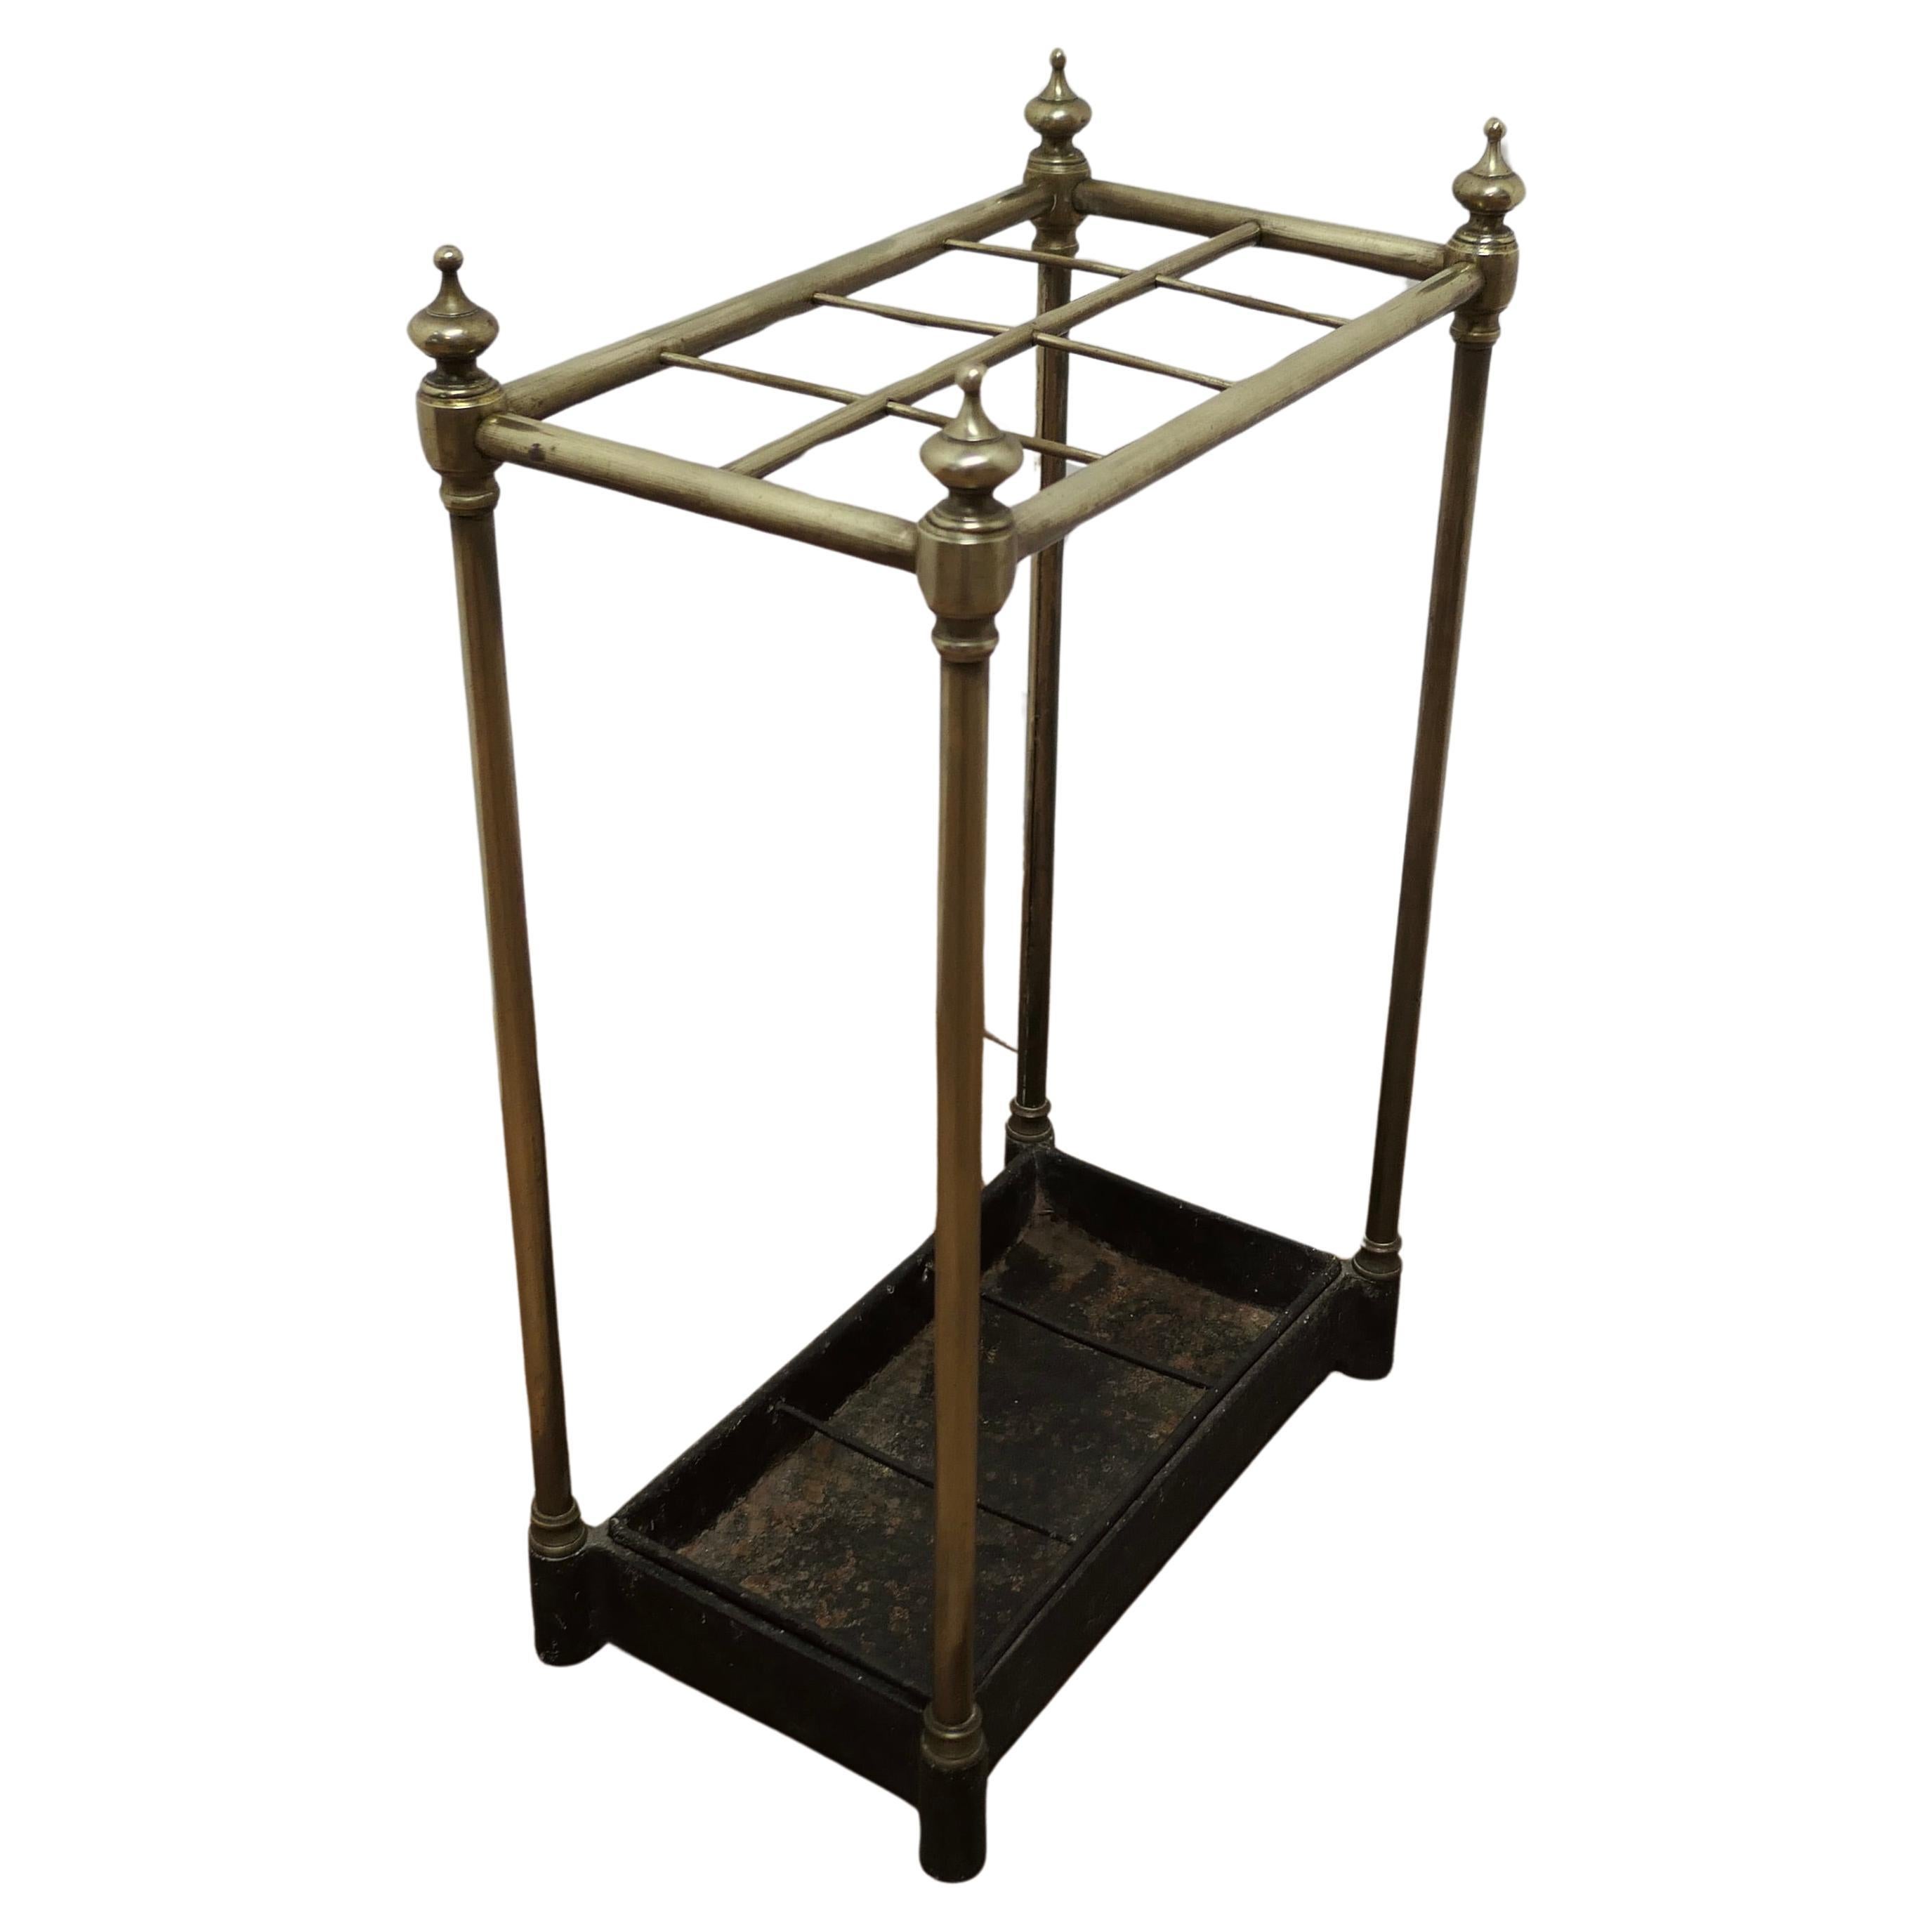 Victorian Brass and Cast Iron Walking Stick Stand or Umbrella Stand

A charming piece, the stand has a brass top divided into 8 sections, more than most. to hold either Walking Sticks or Umbrellas, the heavy removable iron base is the drip tray
The